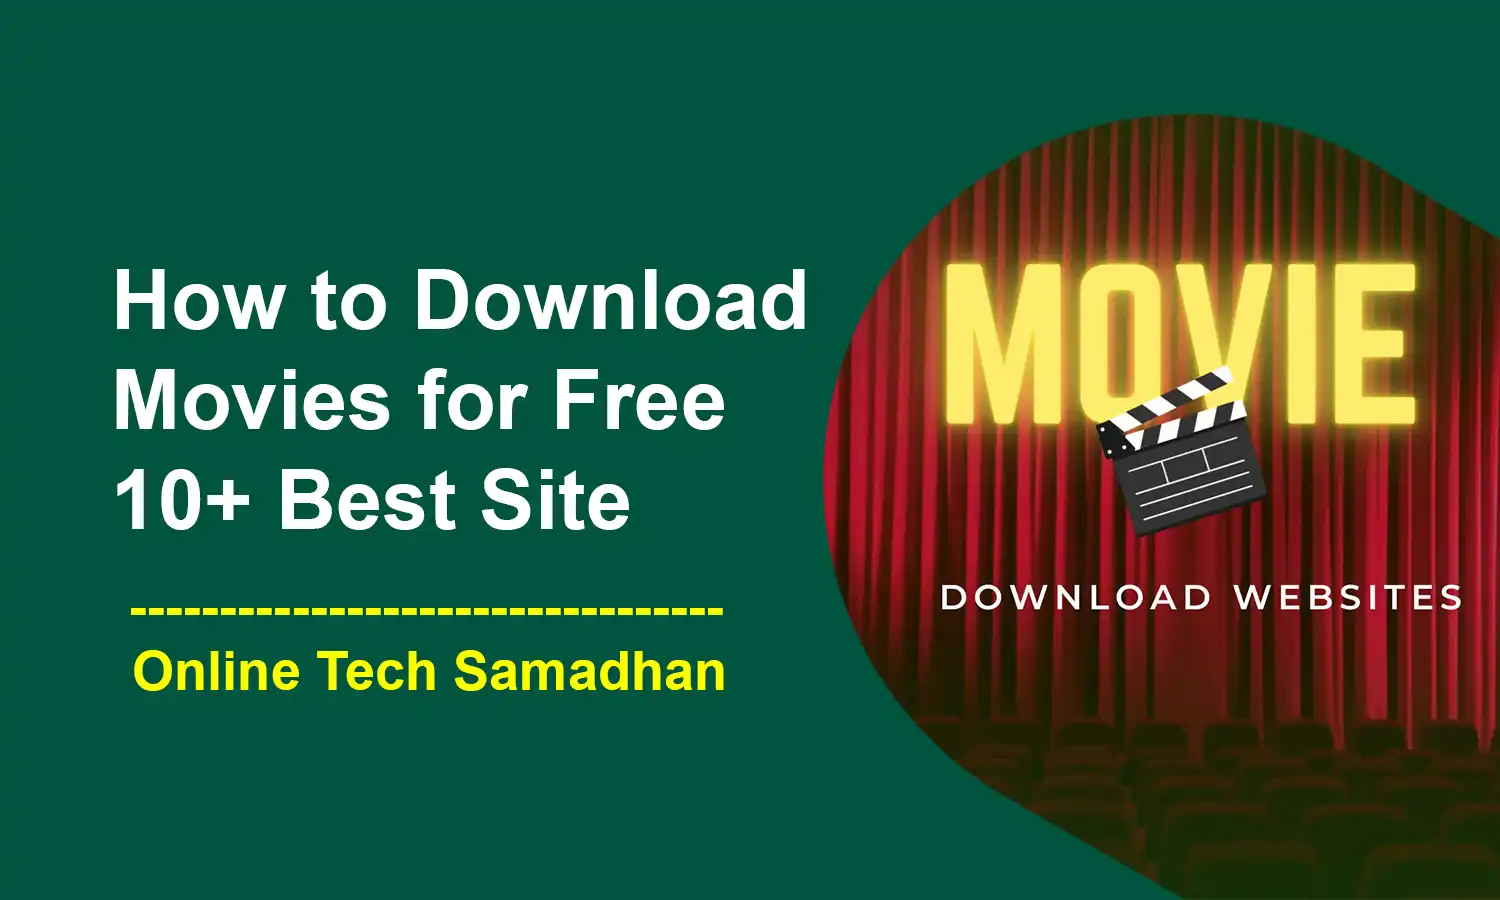 How to Download Movies for Free